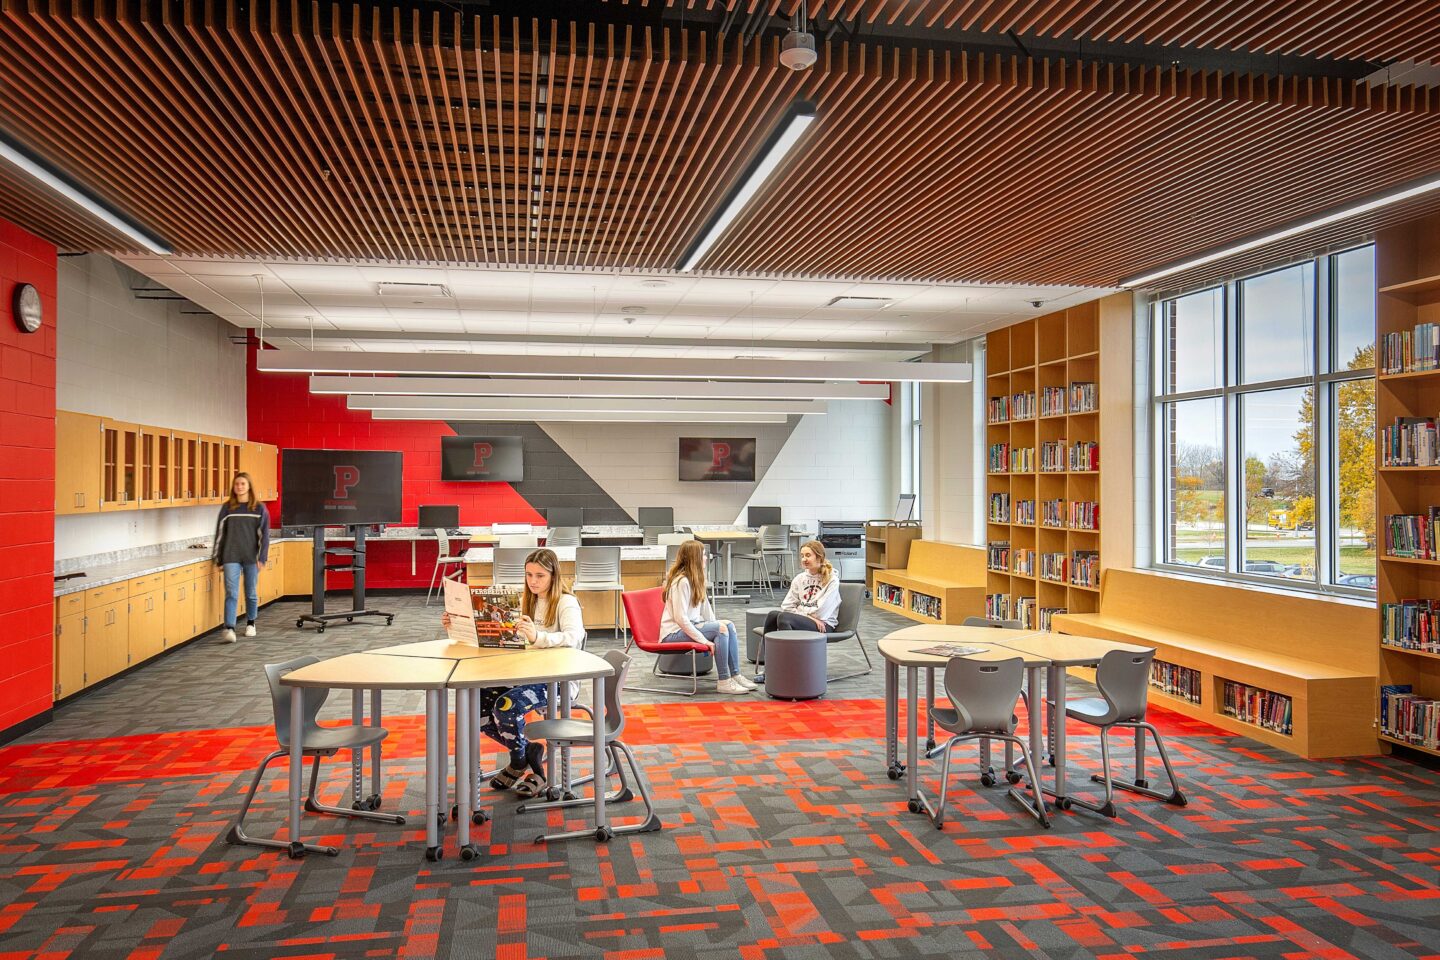 A colorful, comfortable, and windowed library gives students space to work and study, with colorful accents in school colors at Pewaukee High School